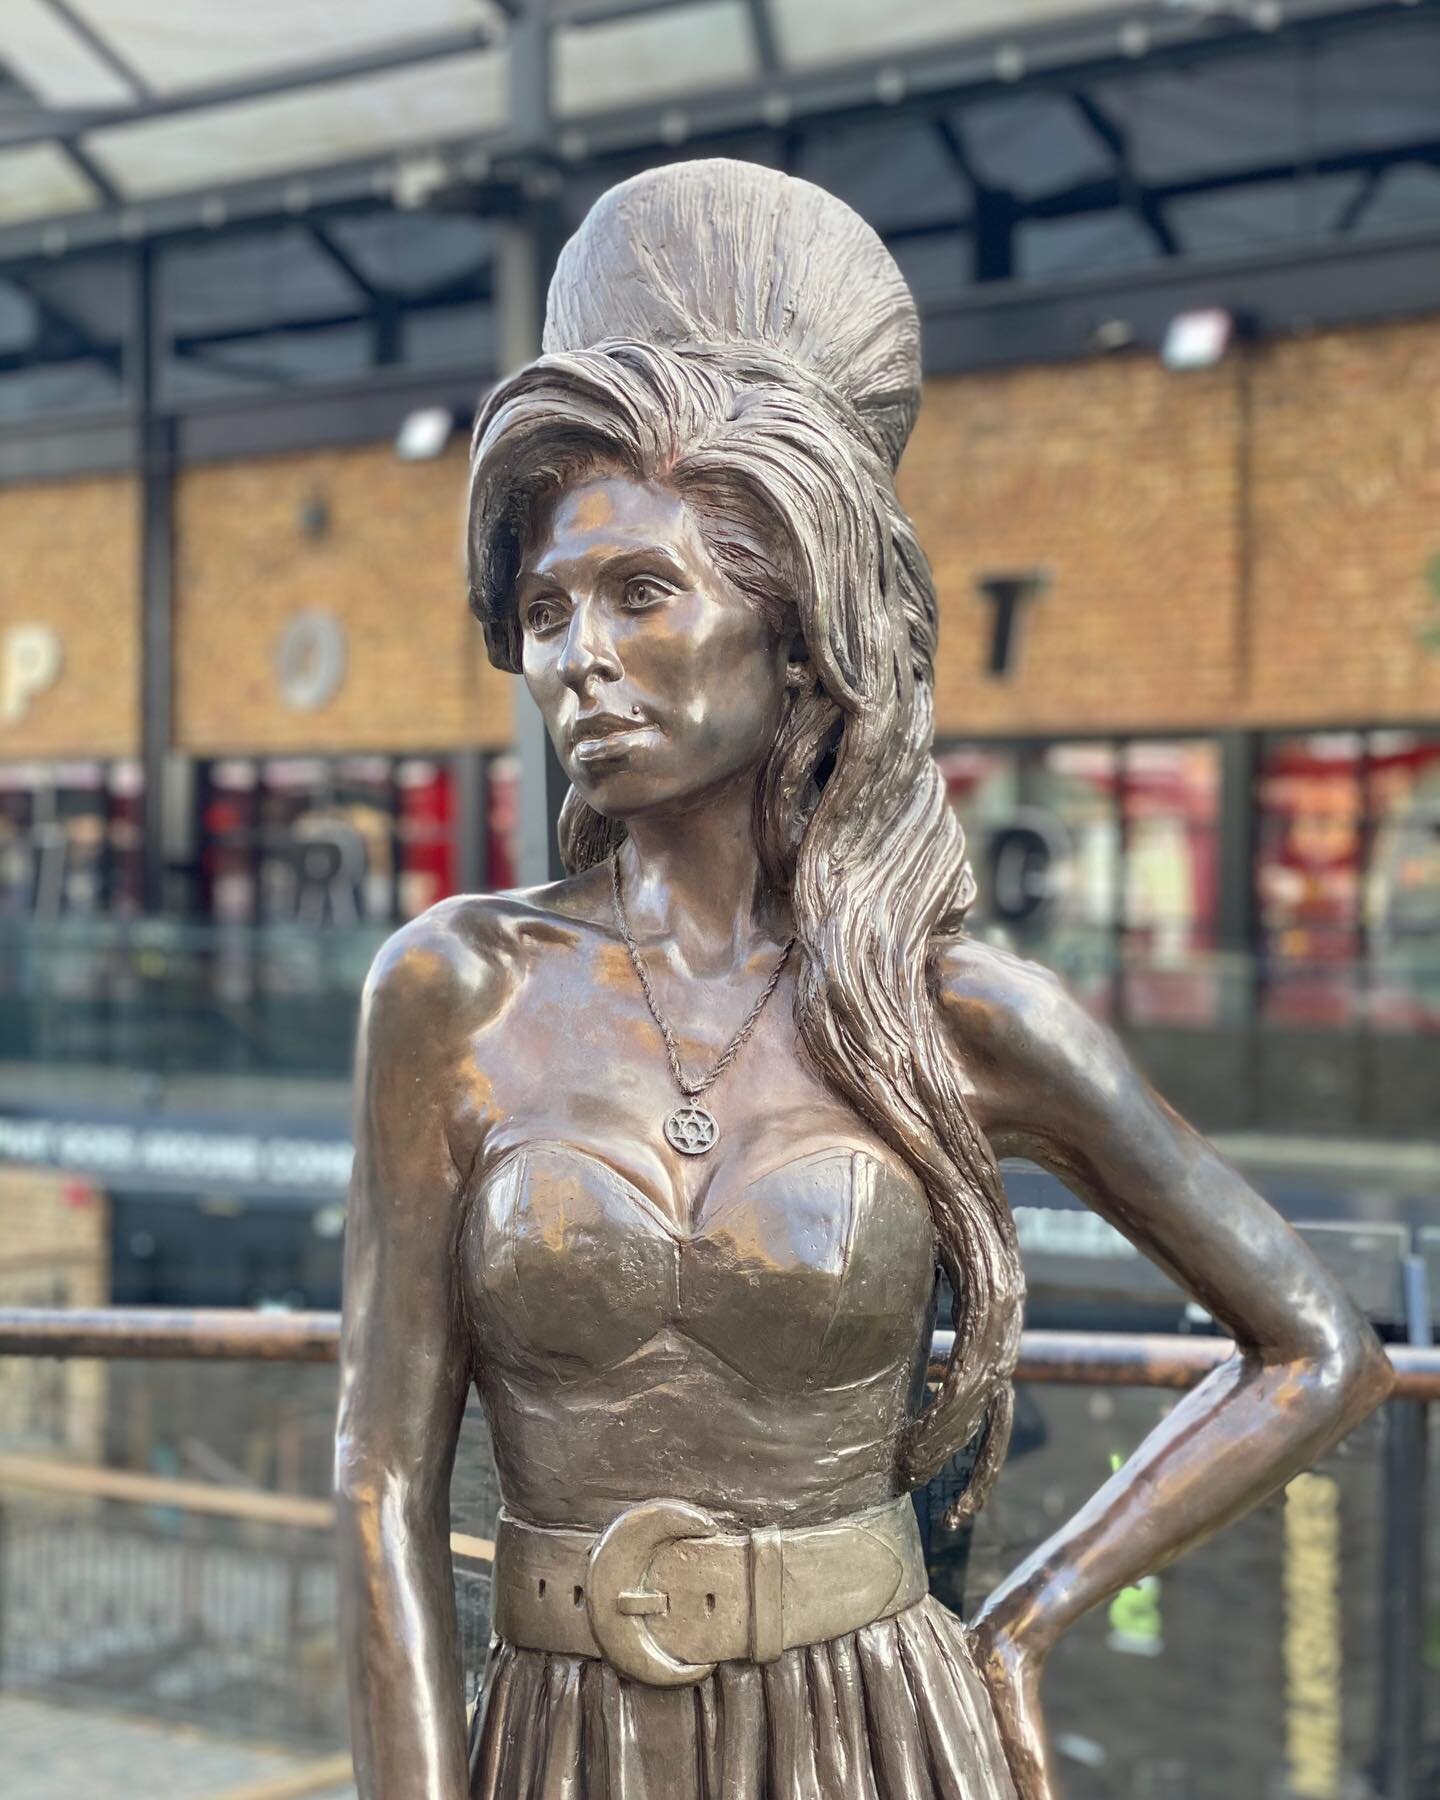 &ldquo;Life&rsquo;s short. Anything could happen, and it usually does, so there&rsquo;s no point in sitting around thinking about all the if, ands or buts&rdquo;

Couldn&rsquo;t swing through Camden and not see the statue of one of my favourite artis